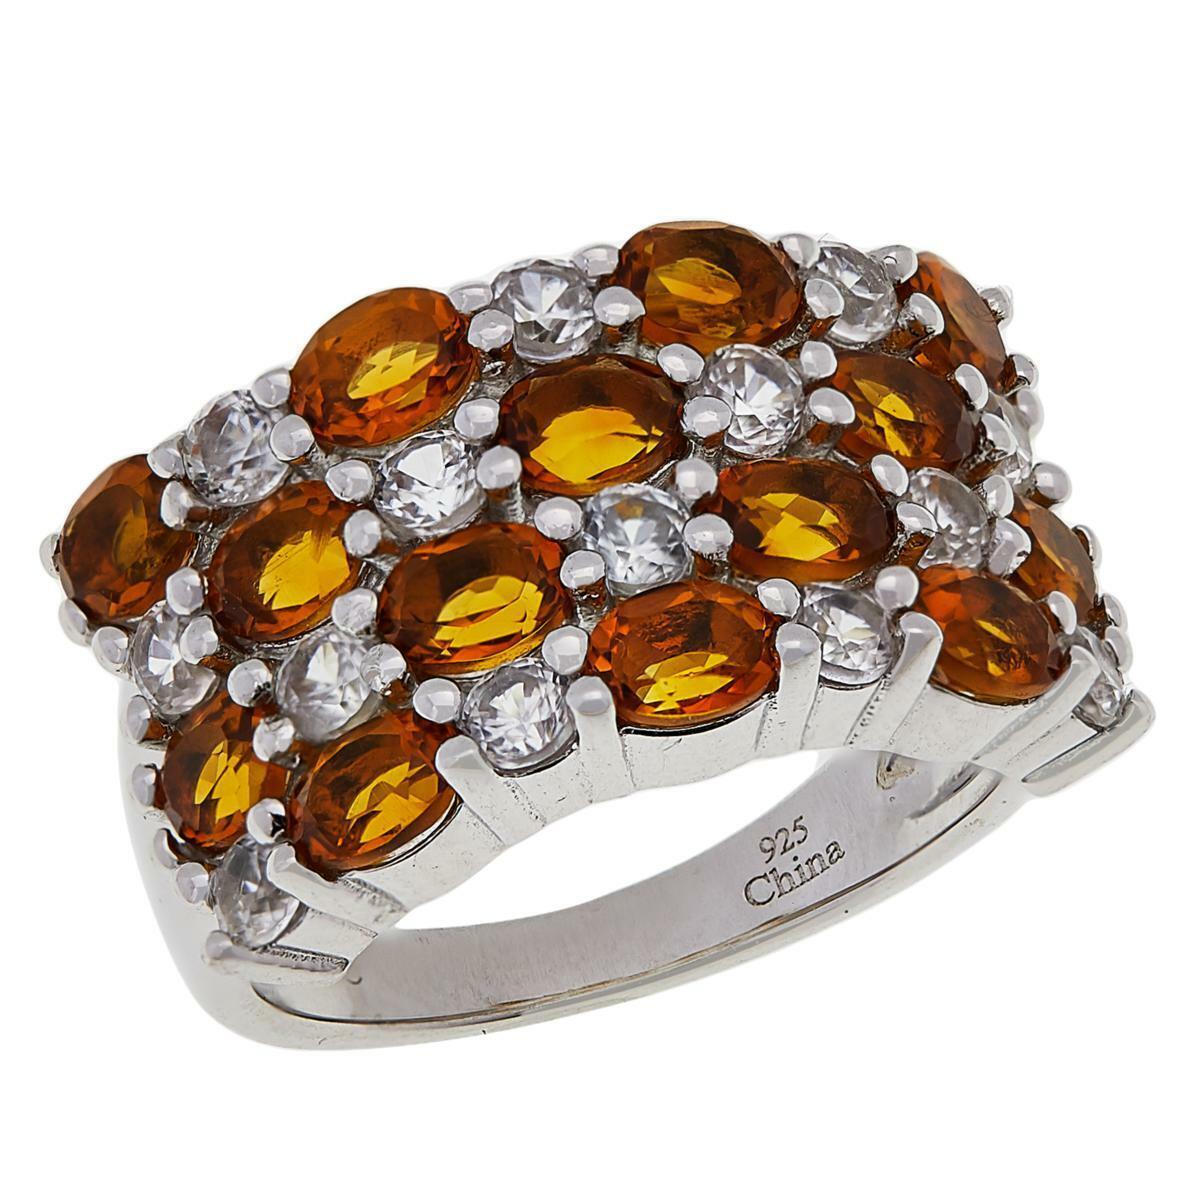 Colleen Lopez Citrine and White Zircon 4 Row Band Ring, Size 8